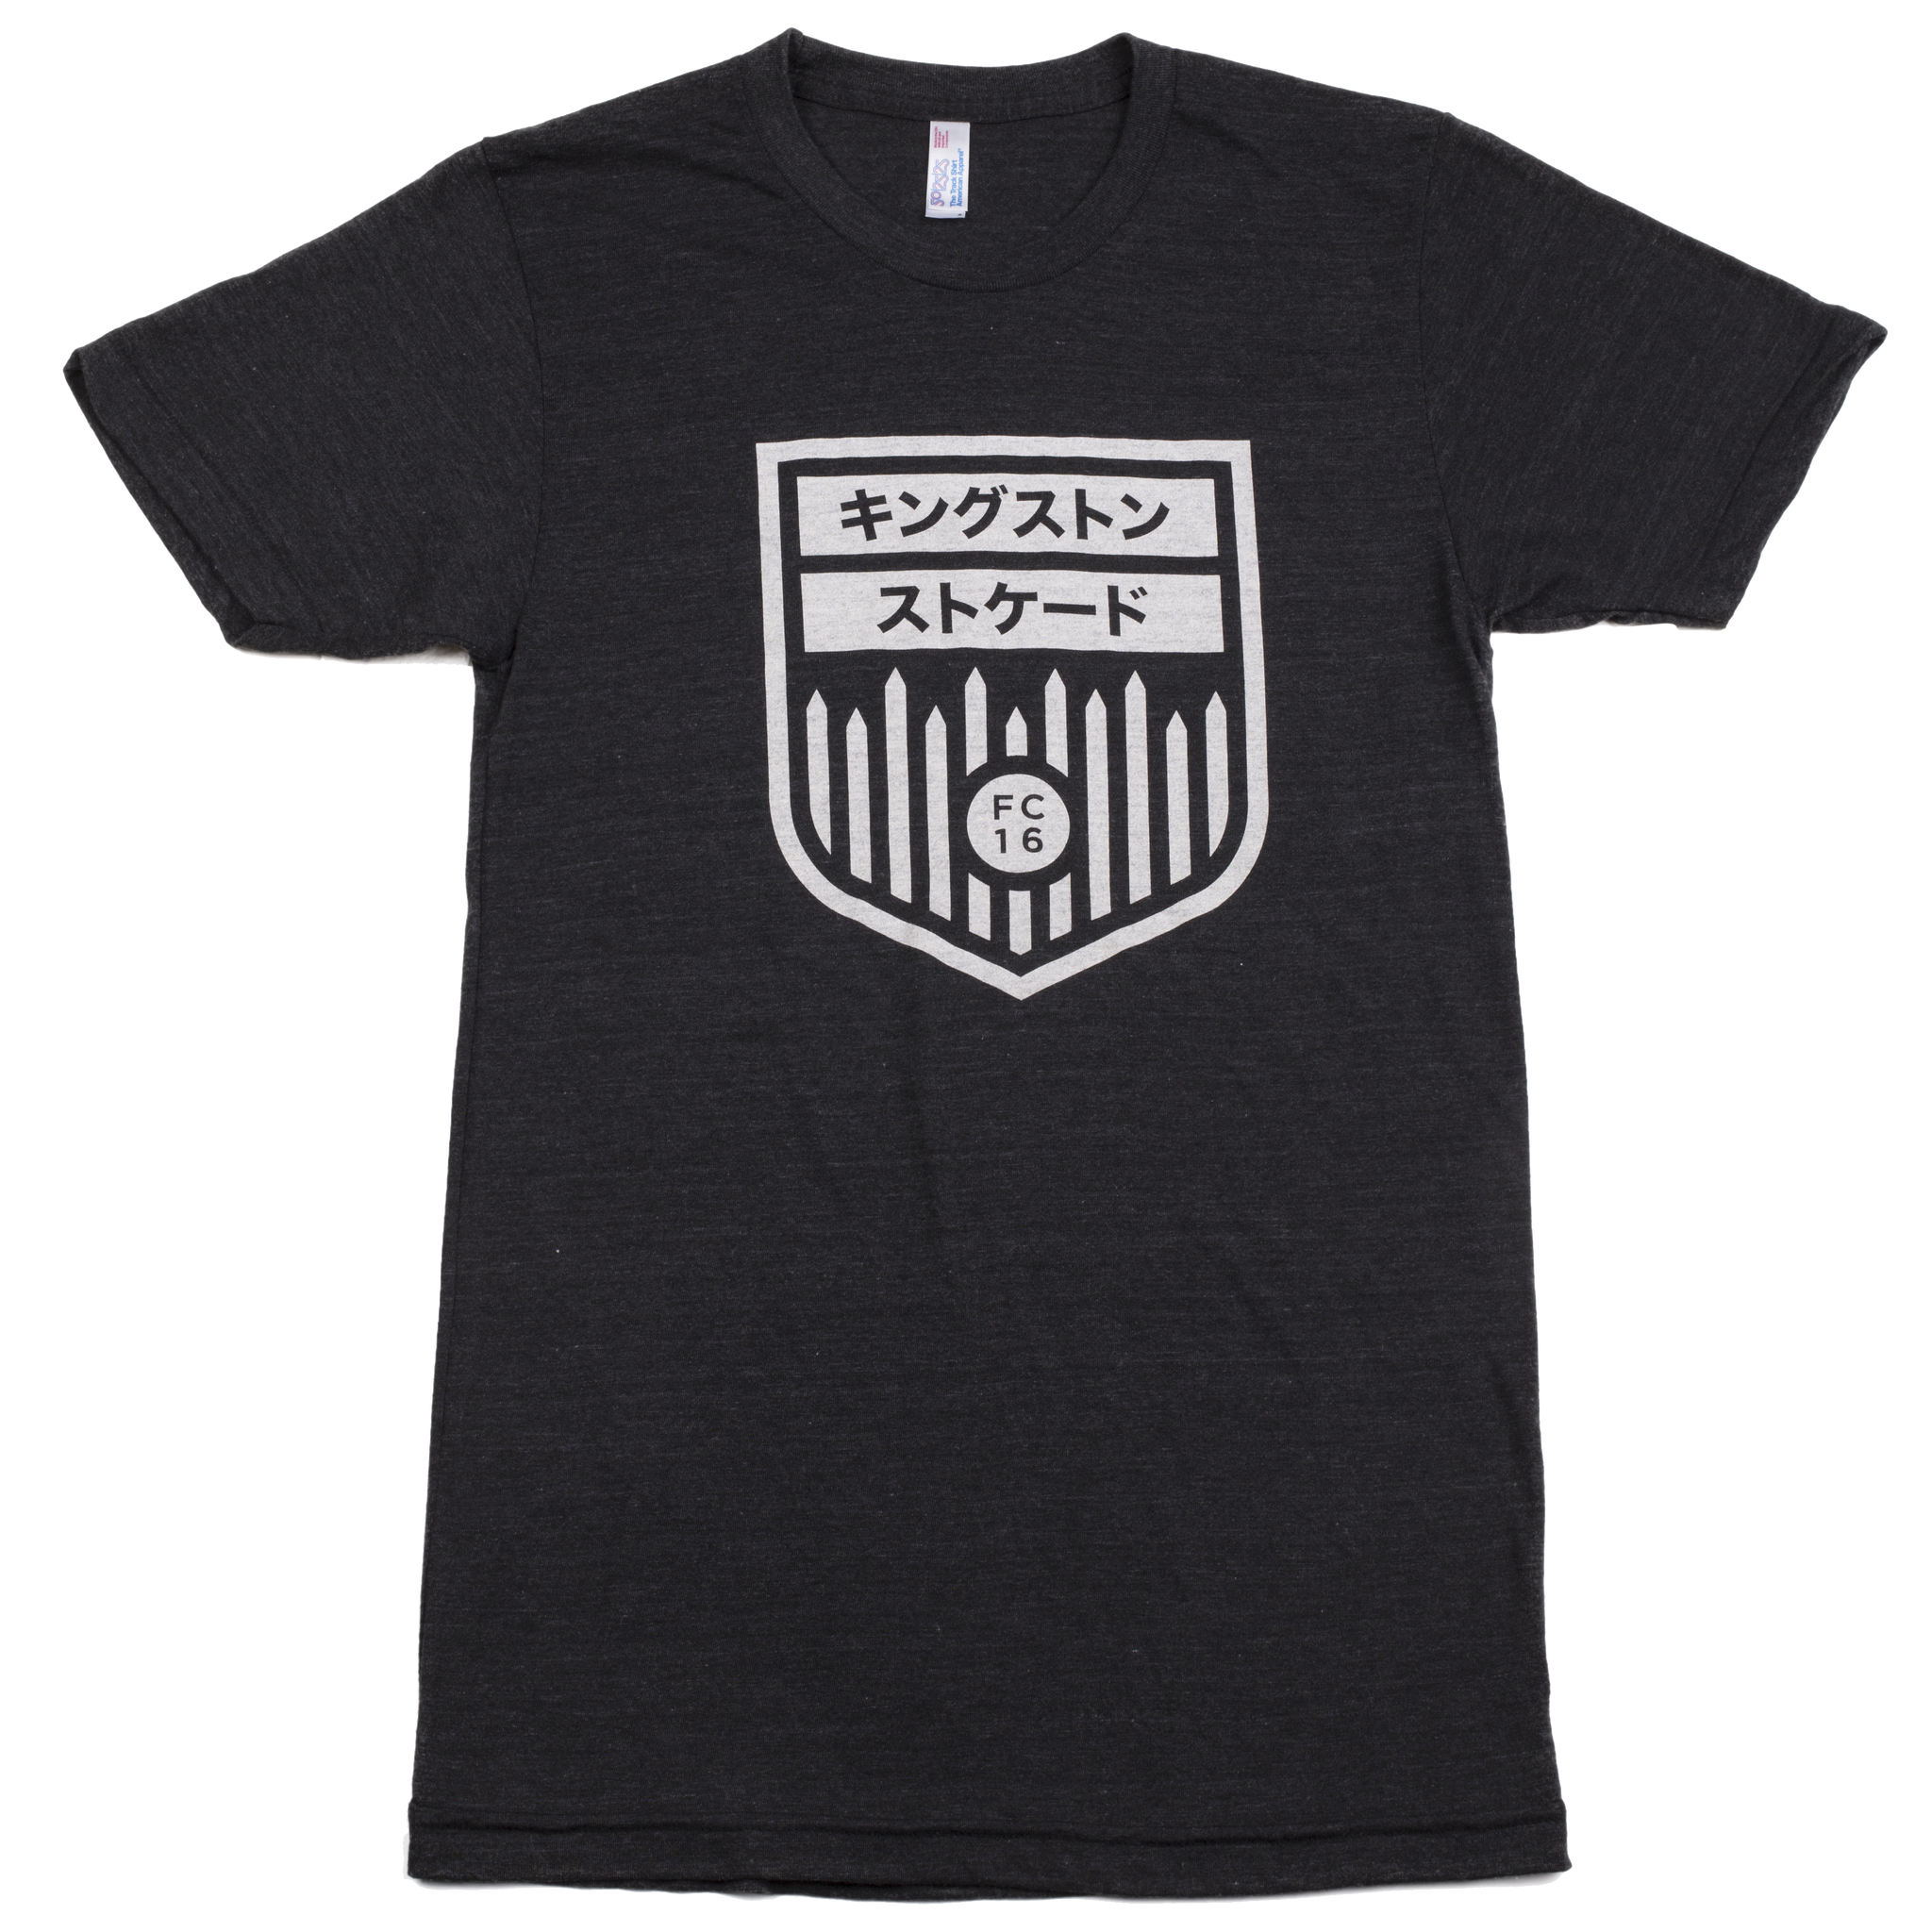 Stockade Tee – Japanese "International Edition" (2016) – SOLD OUT